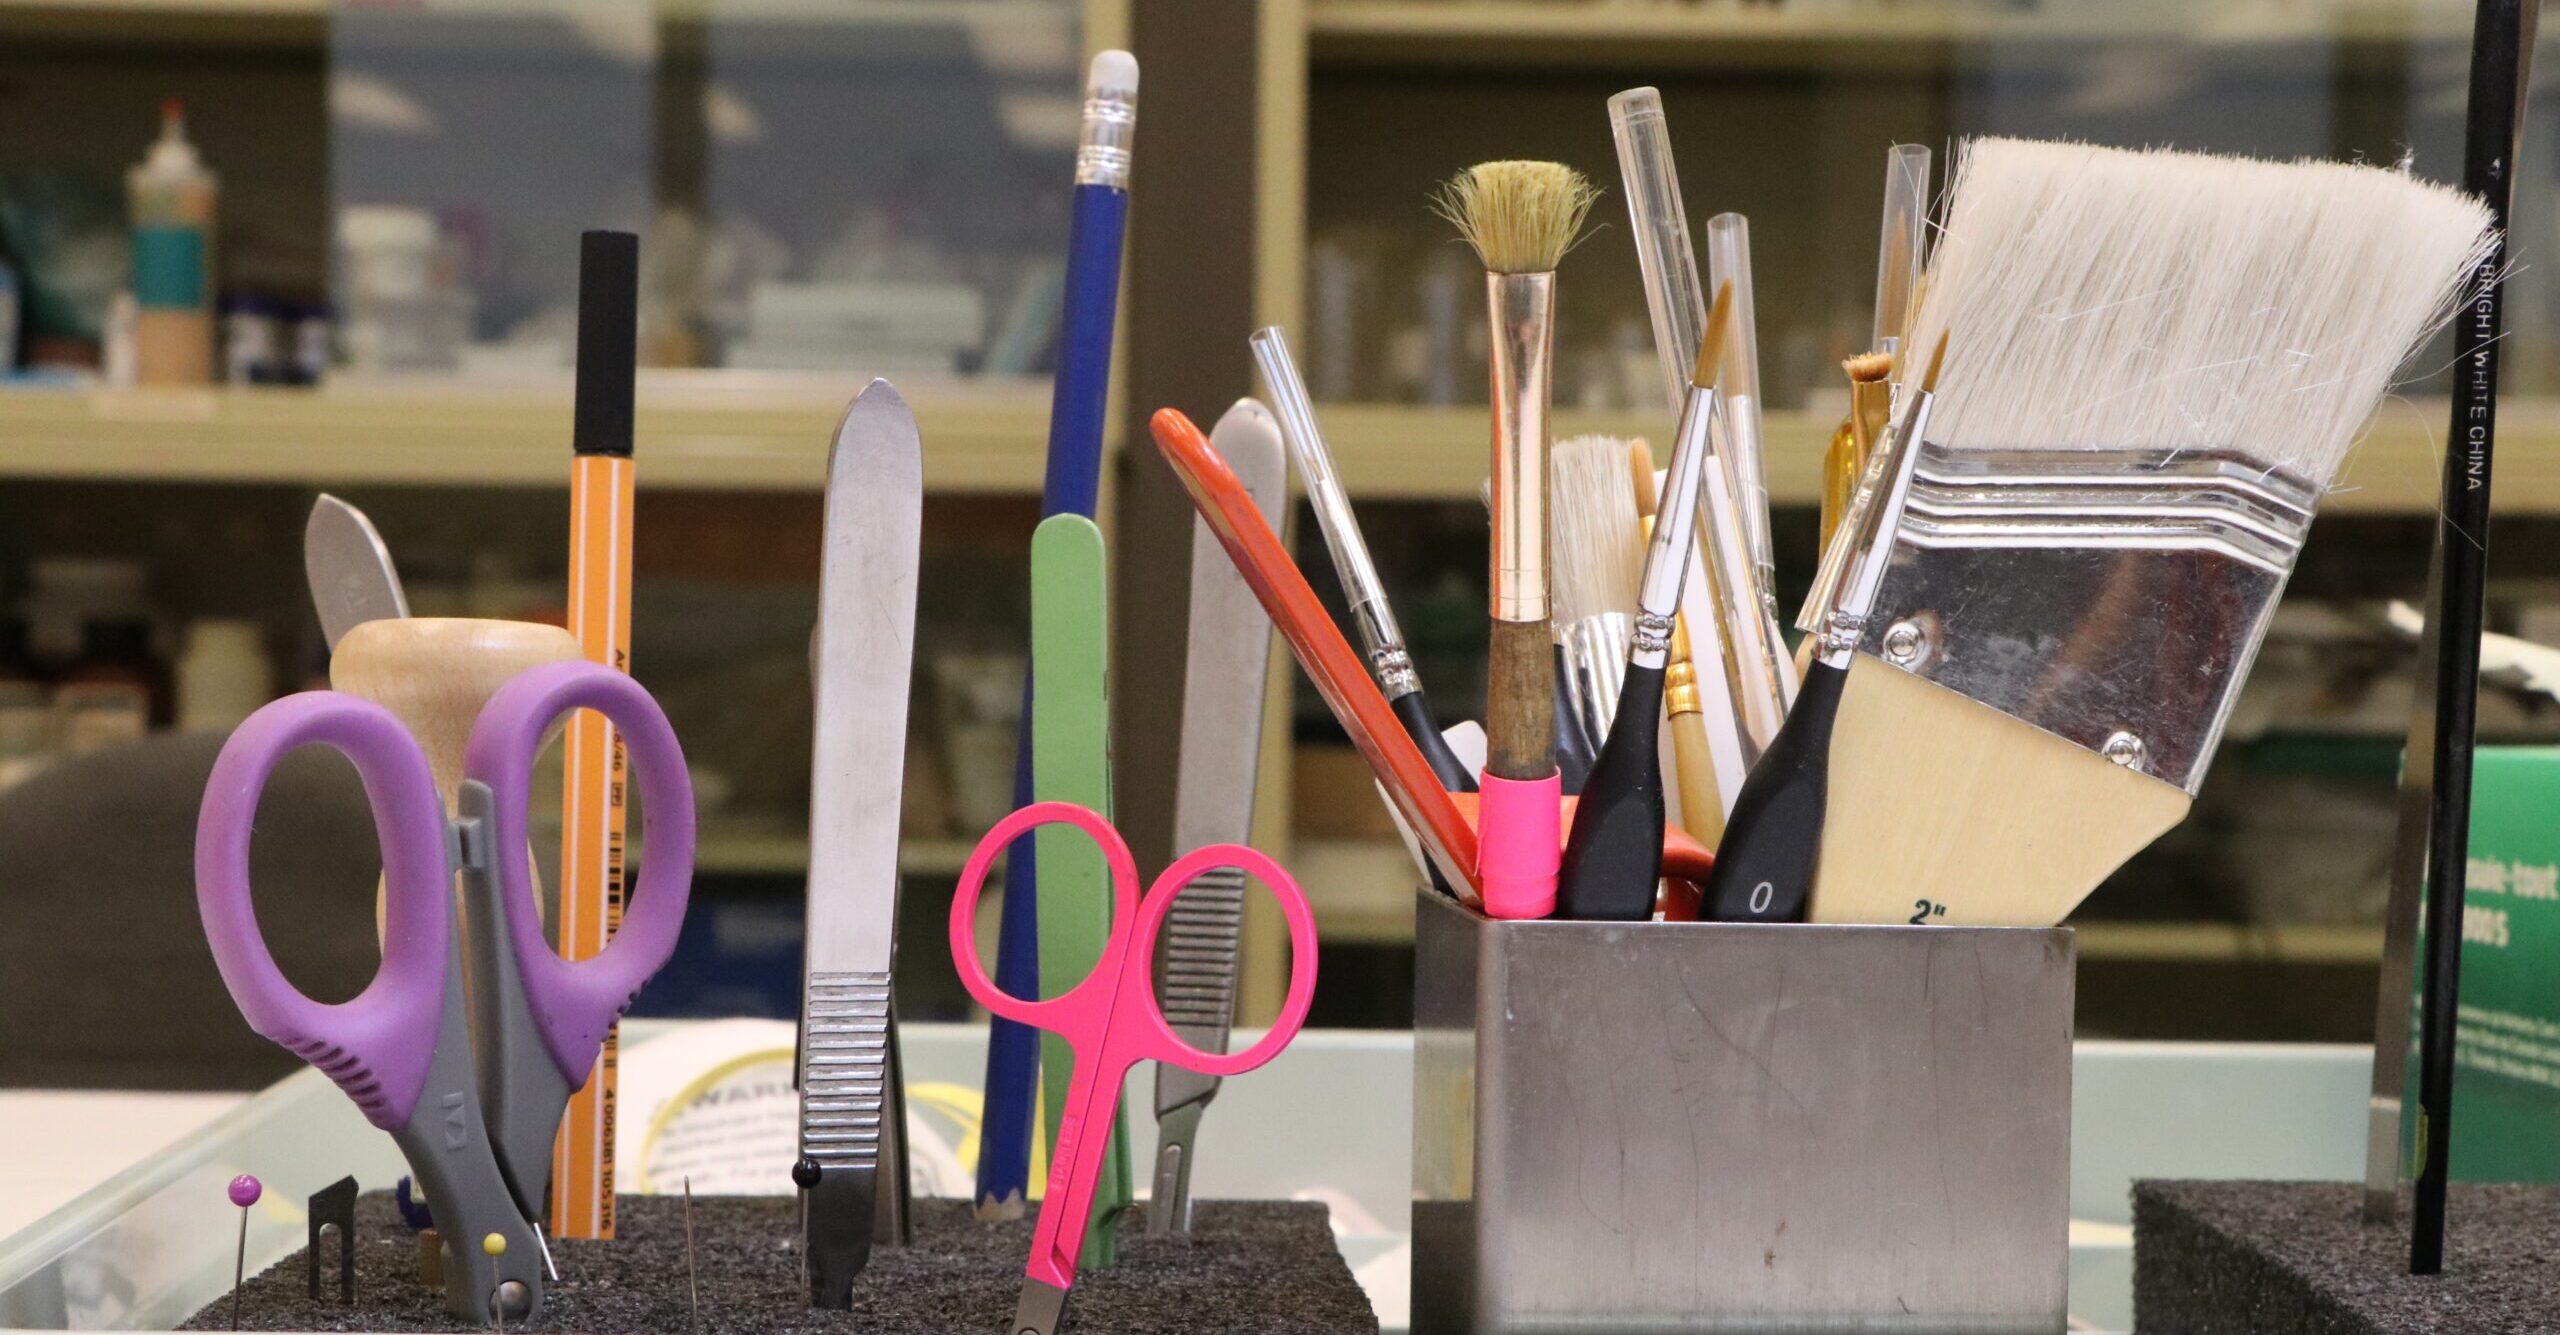 Scissors, scalpel blades, and various sized paint brushes sitting in stainless steel holder.